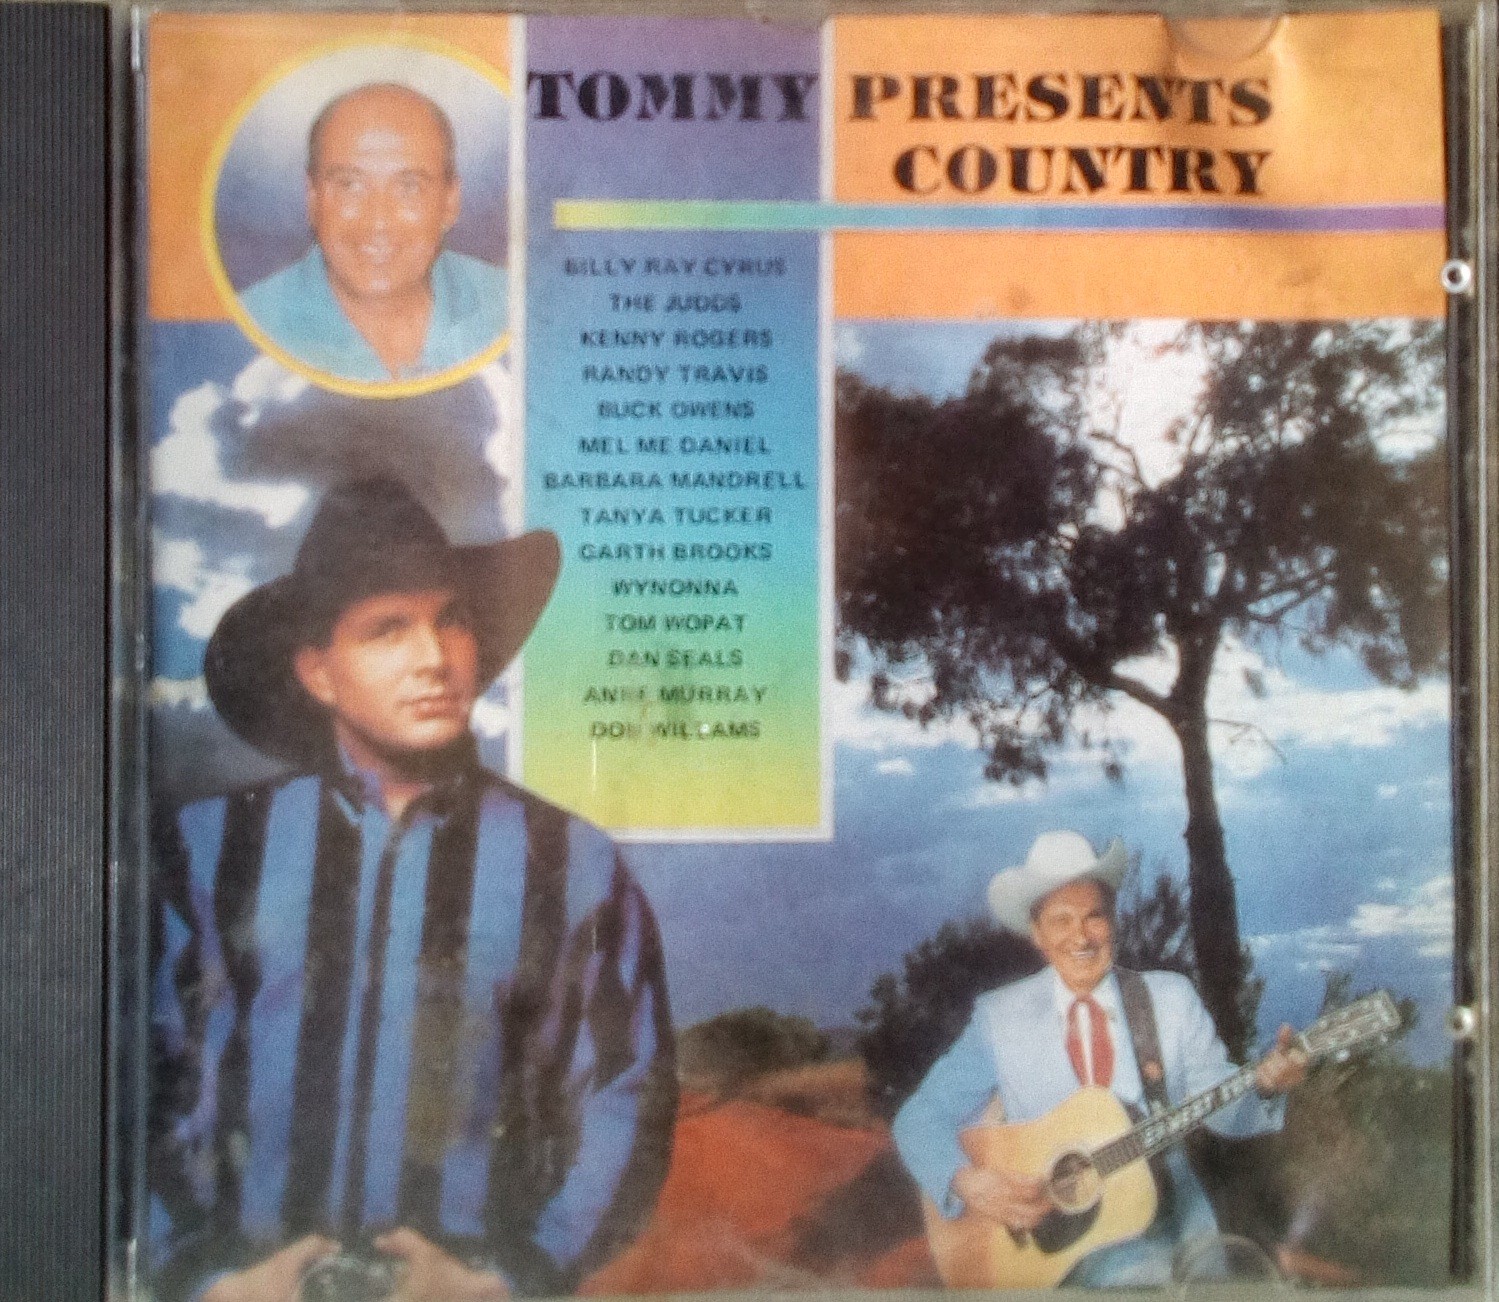 Tommy presents country